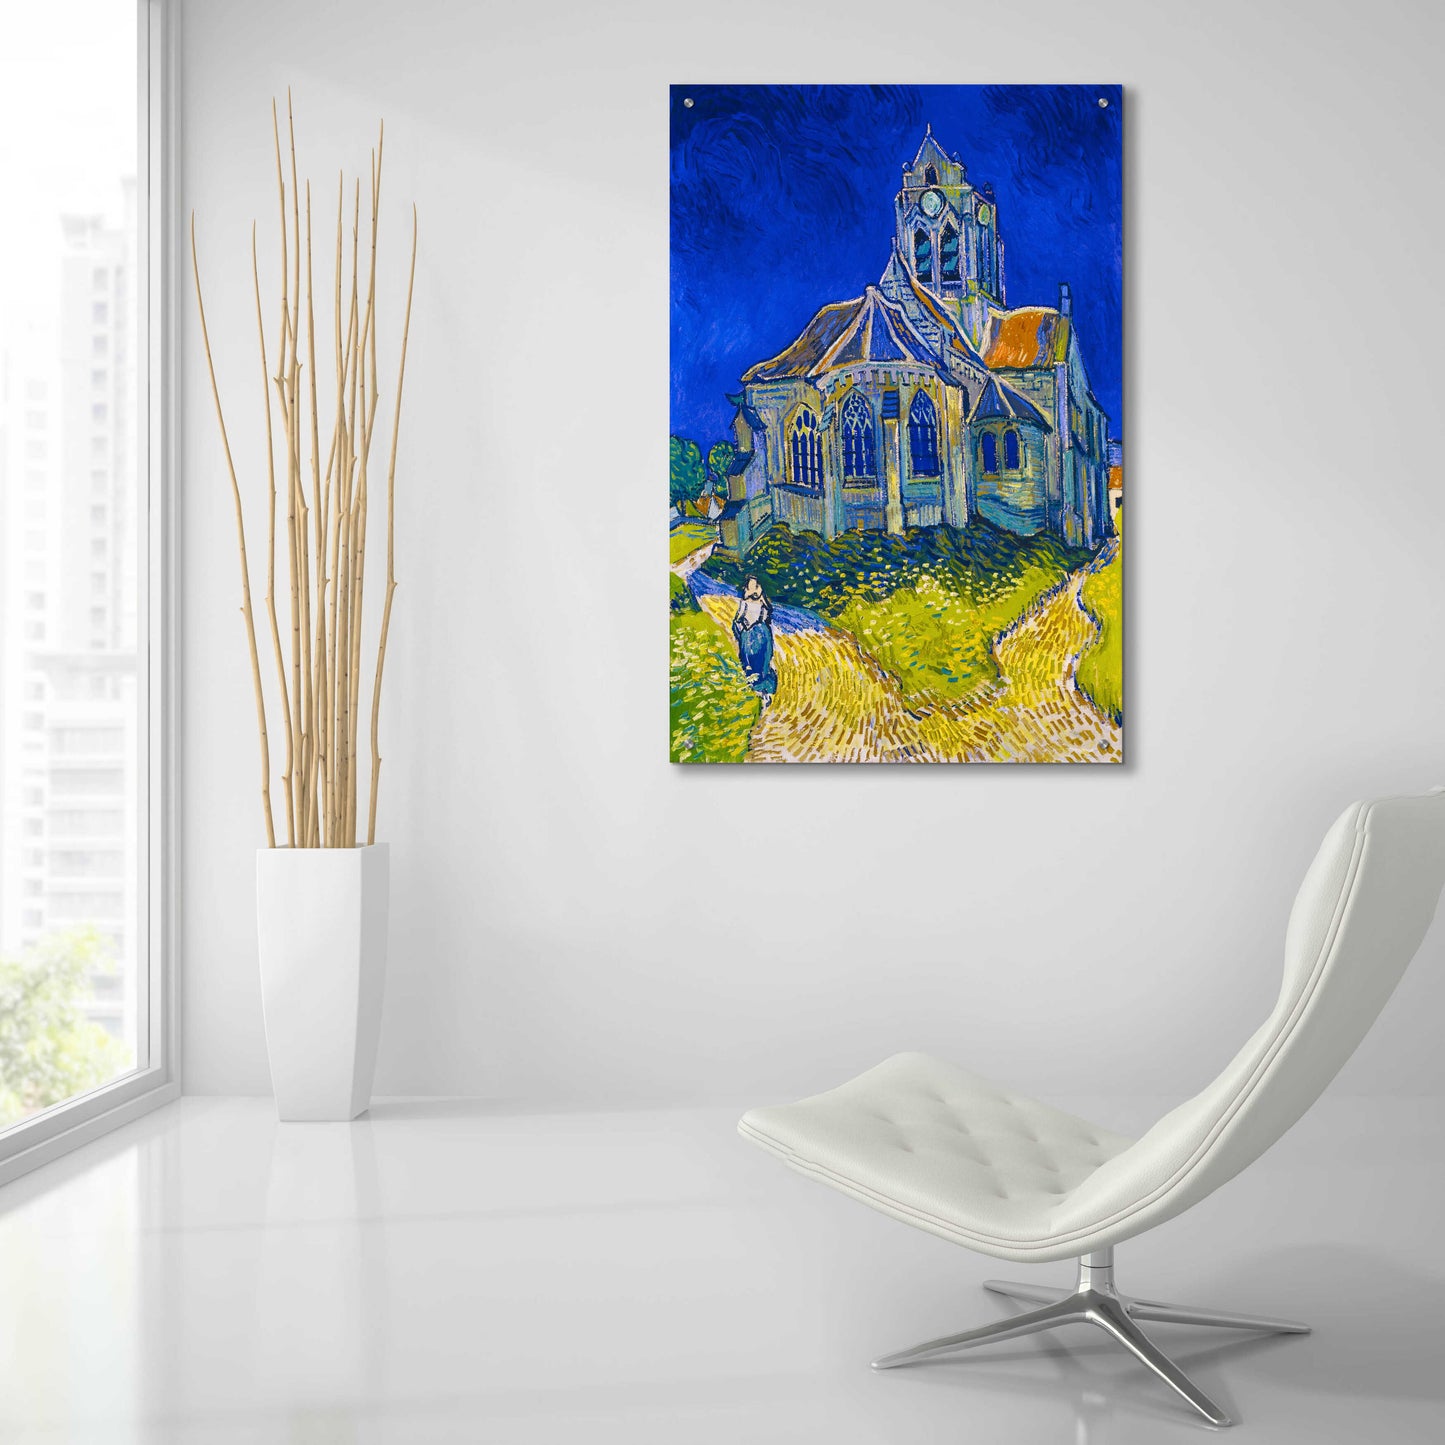 Epic Art 'The Church In Auvers-Sur-Oise, View From The Chevet' by Vincent Van Gogh, Acrylic Glass Wall Art,24x36